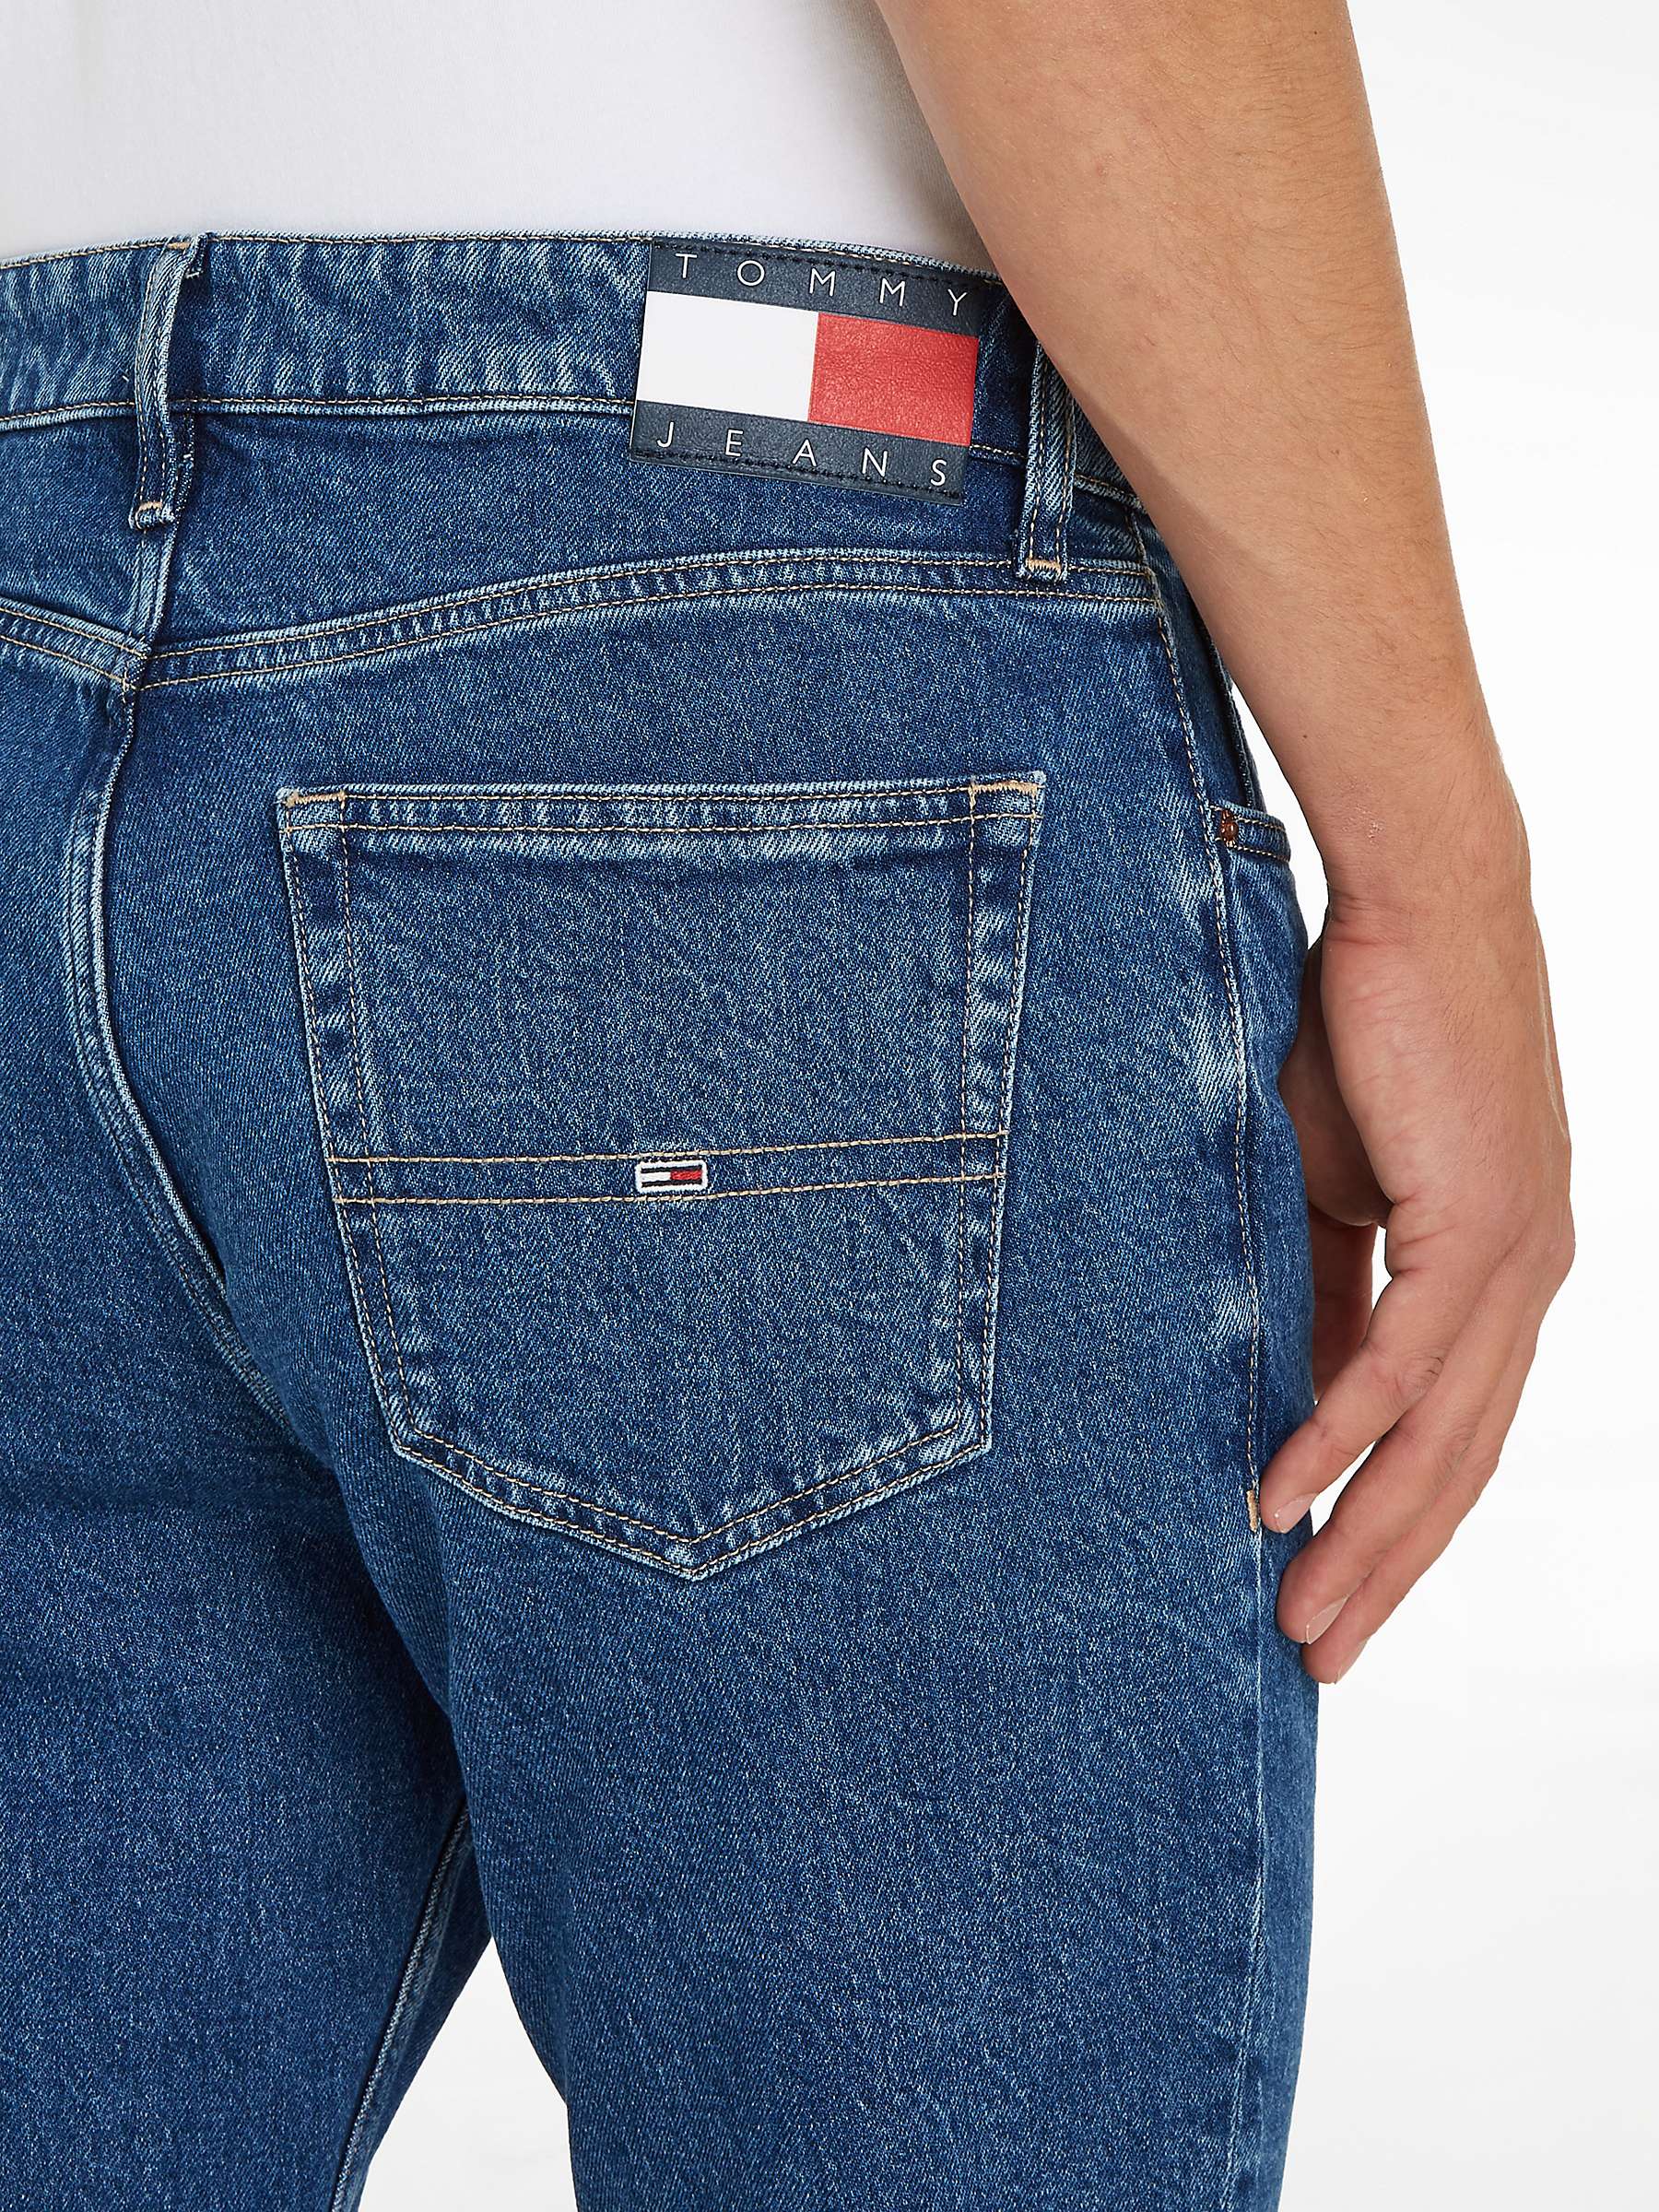 Buy Tommy Jeans Ryan Regular Straight Jeans Online at johnlewis.com